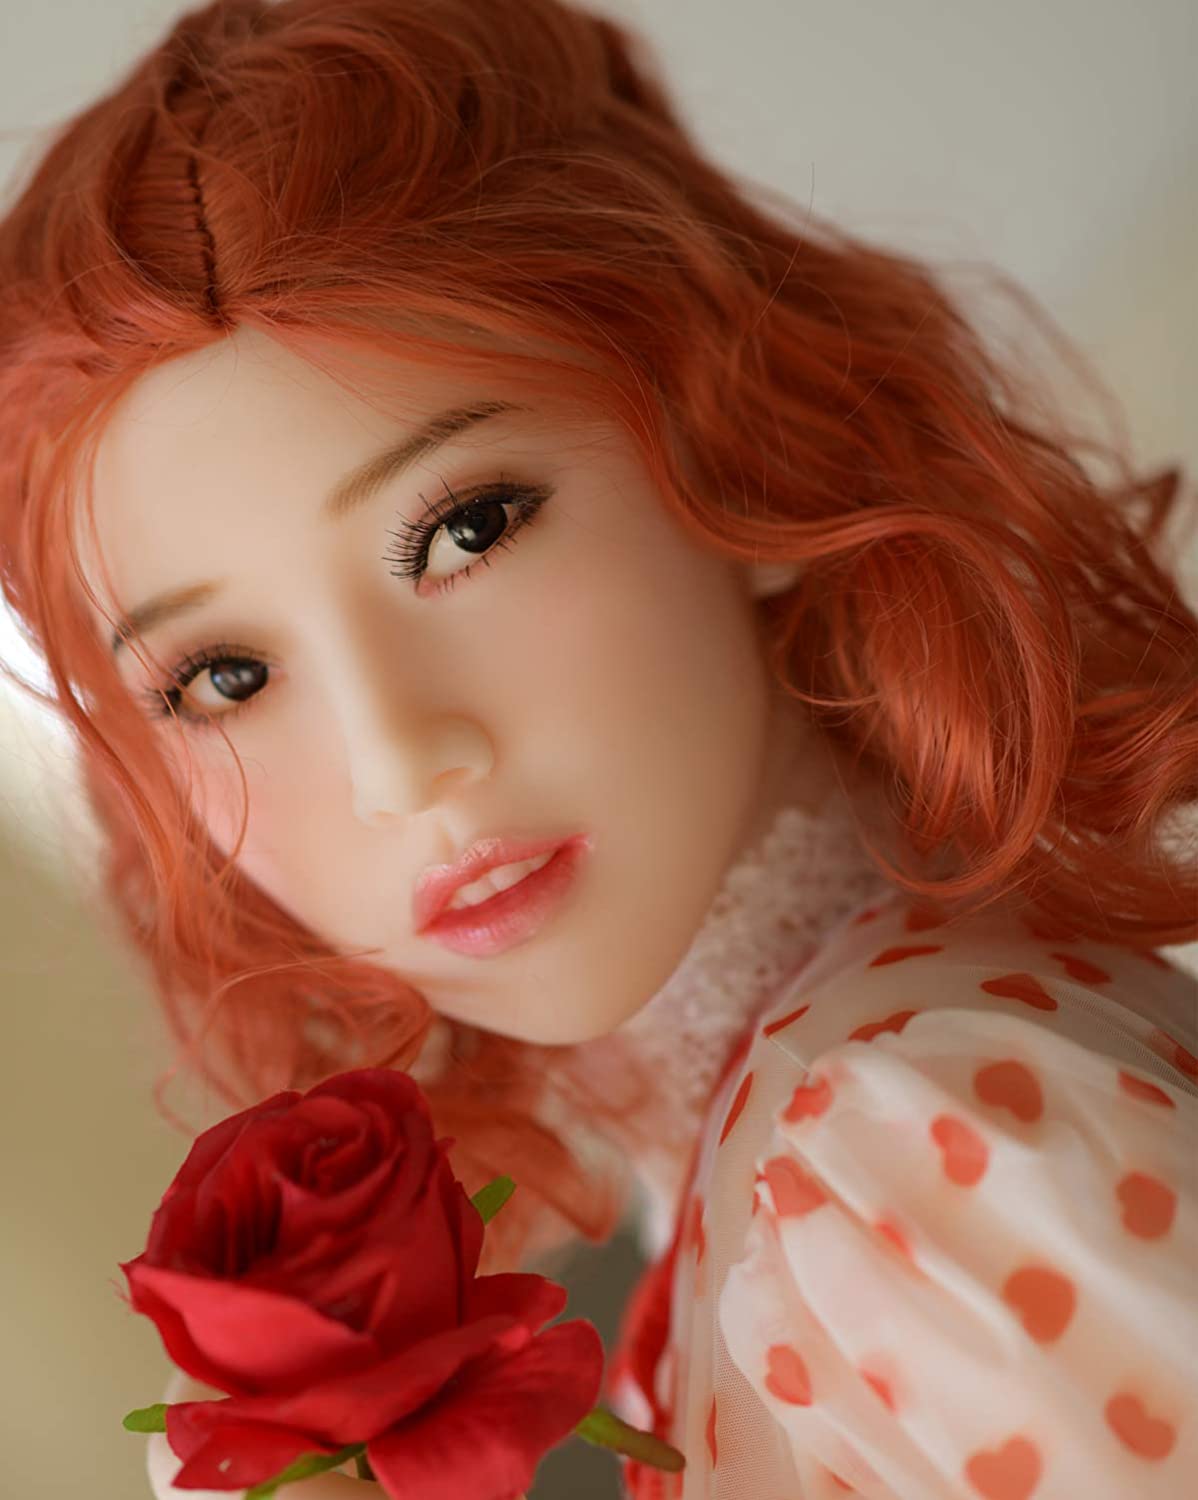 Emerson 165cm with #86 Cute Lady Realistic Adult Love Doll TPE Sex Doll